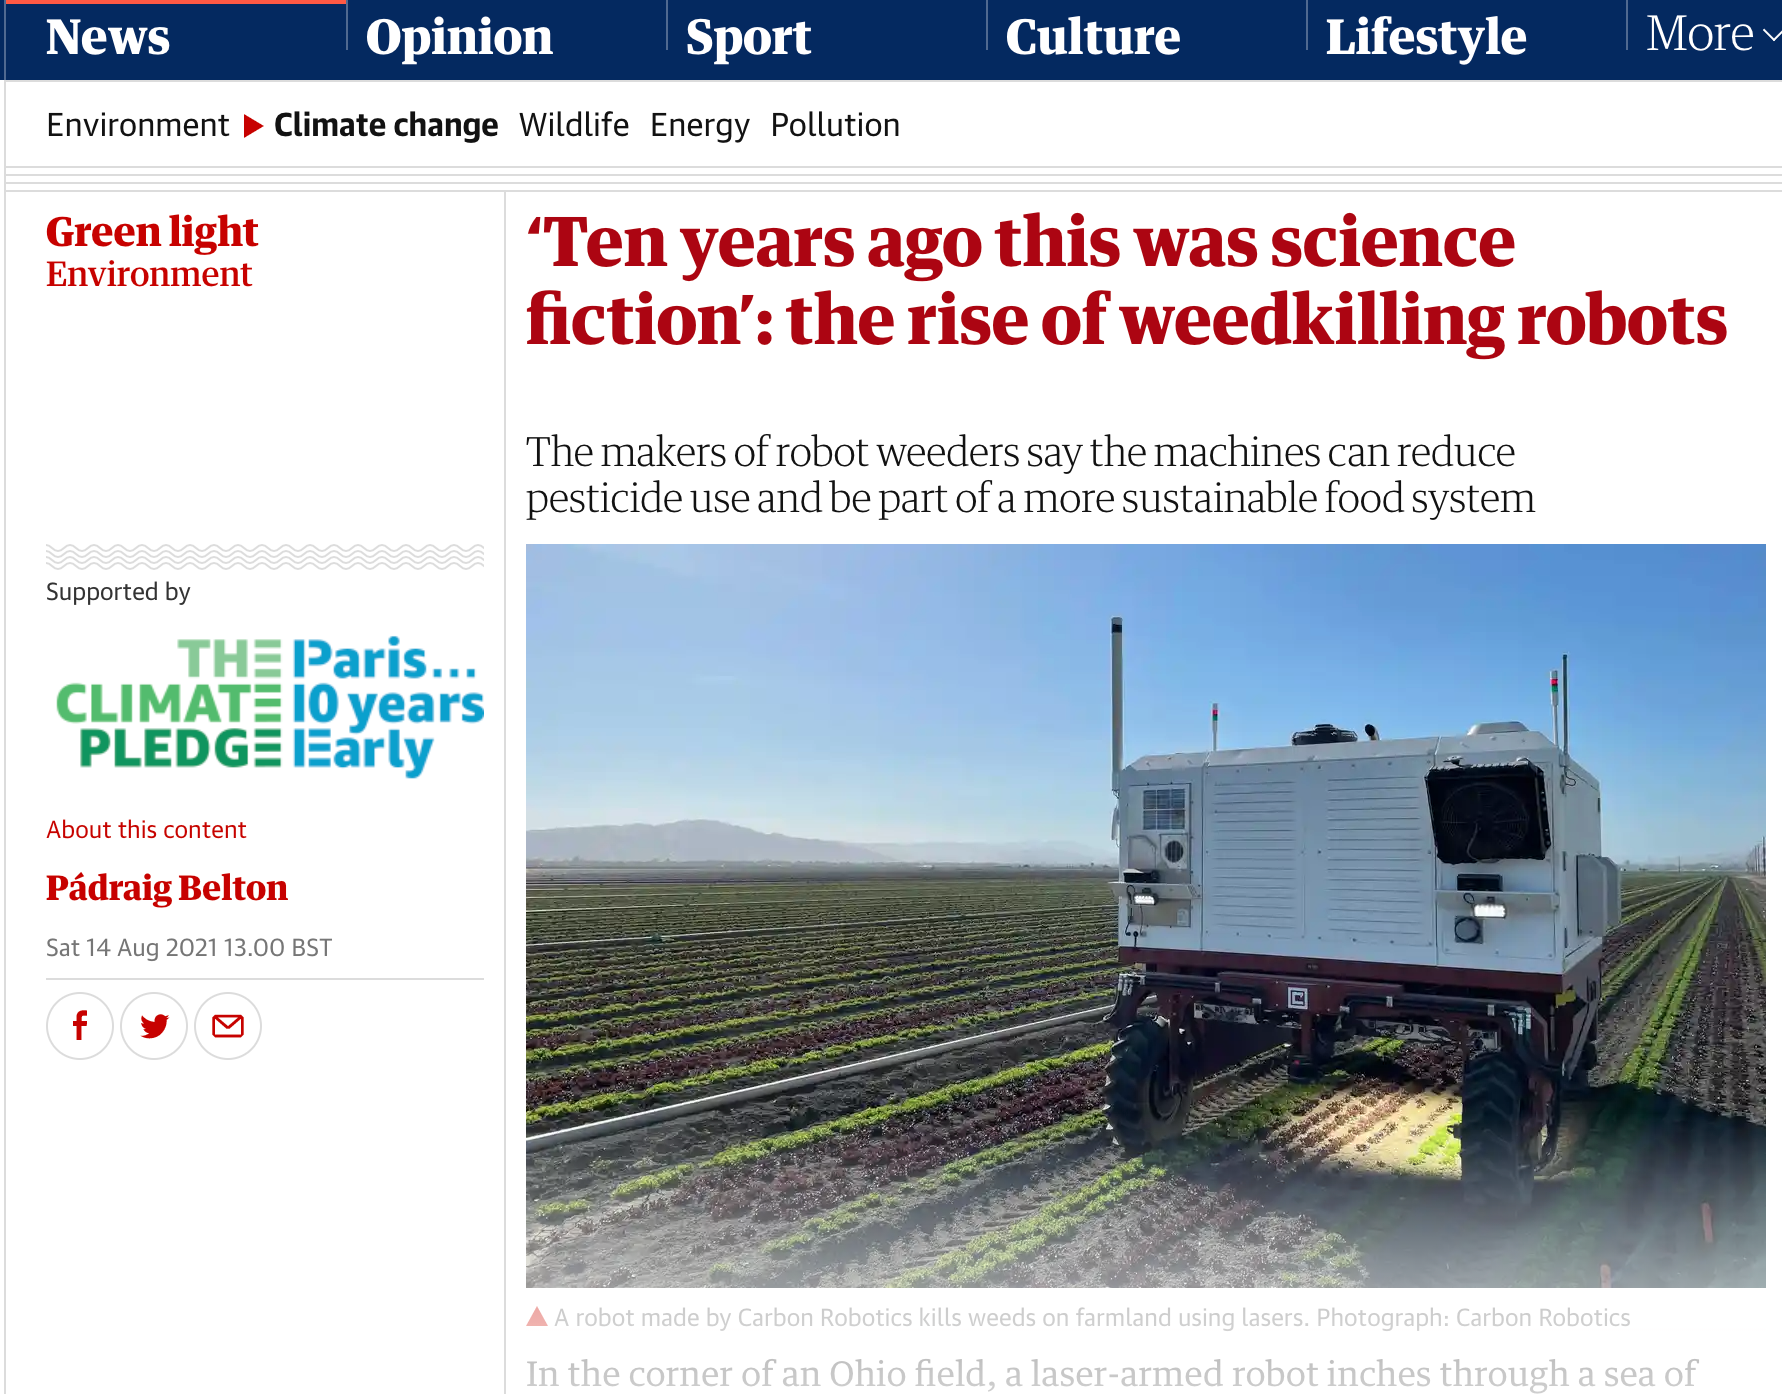 David quoted in The Guardian – the rise of weedkilling robots